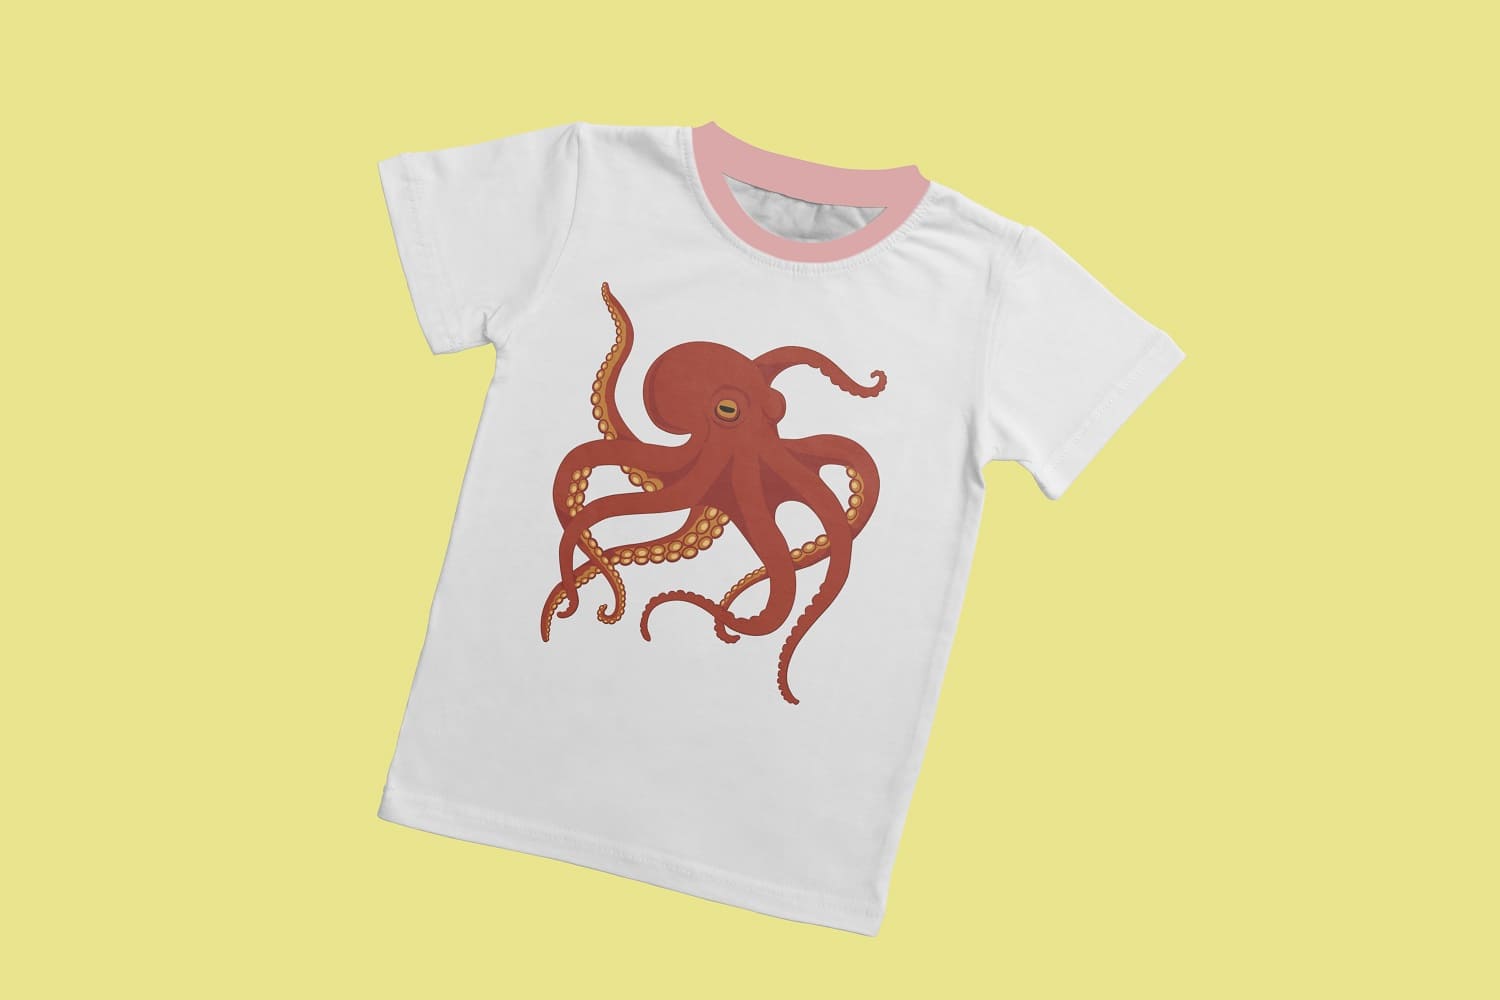 White T-shirt with a dark red octopus on a light yellow background.